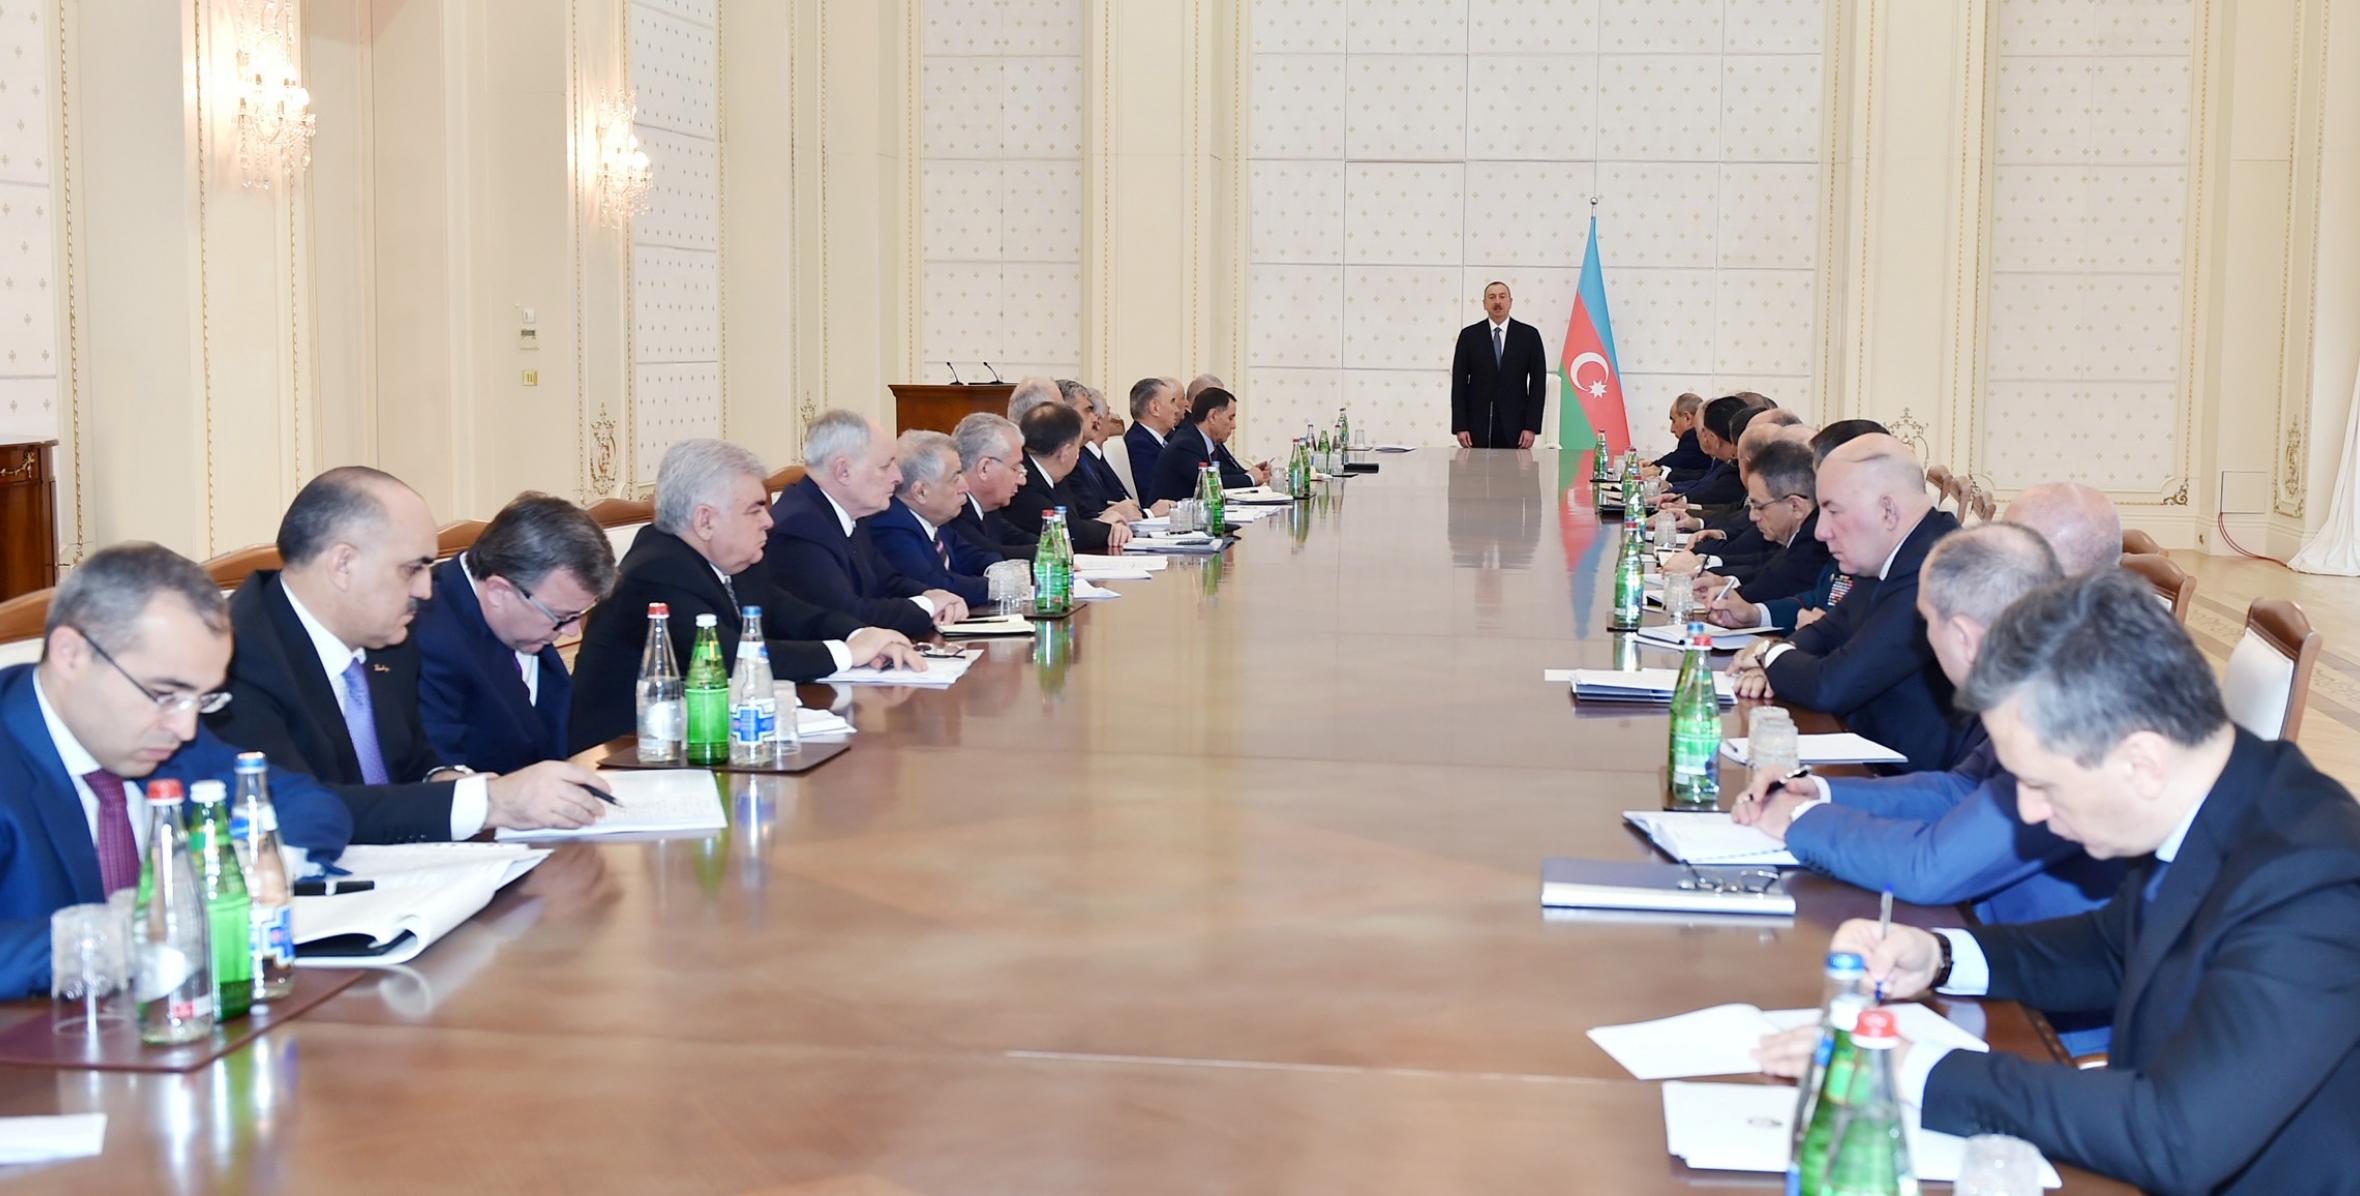 Ilham Aliyev chaired the meeting of the Cabinet of Ministers dedicated to the results of socioeconomic development of 2015 and objectives for the future